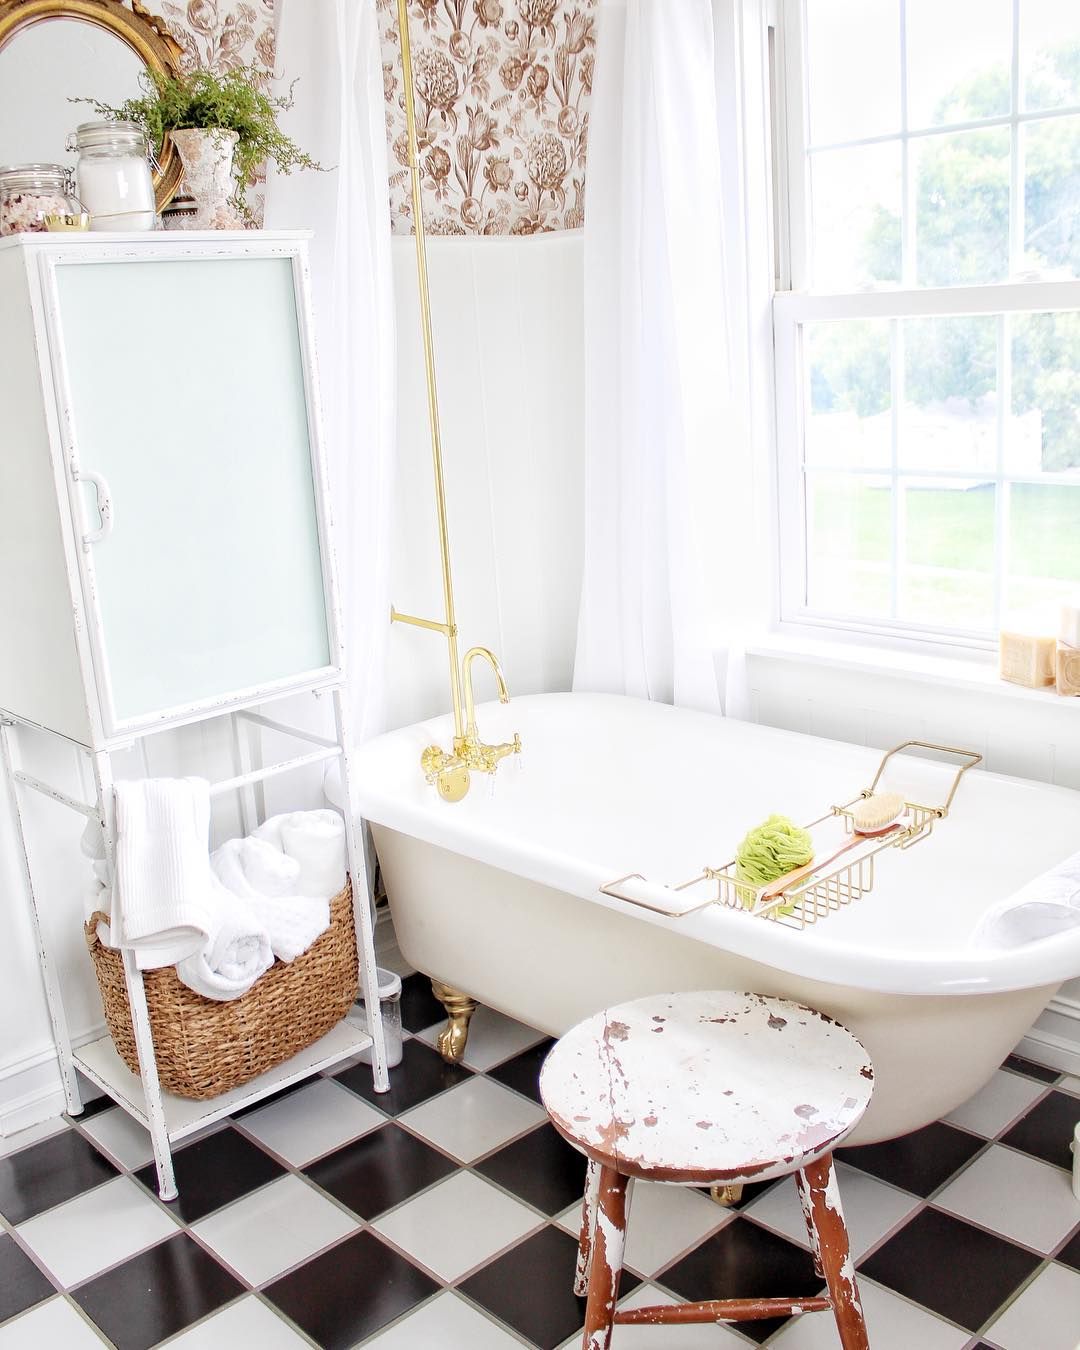 French Country Bathroom with Tub and Checkered Tile Floors via @simplyfrenchmarket